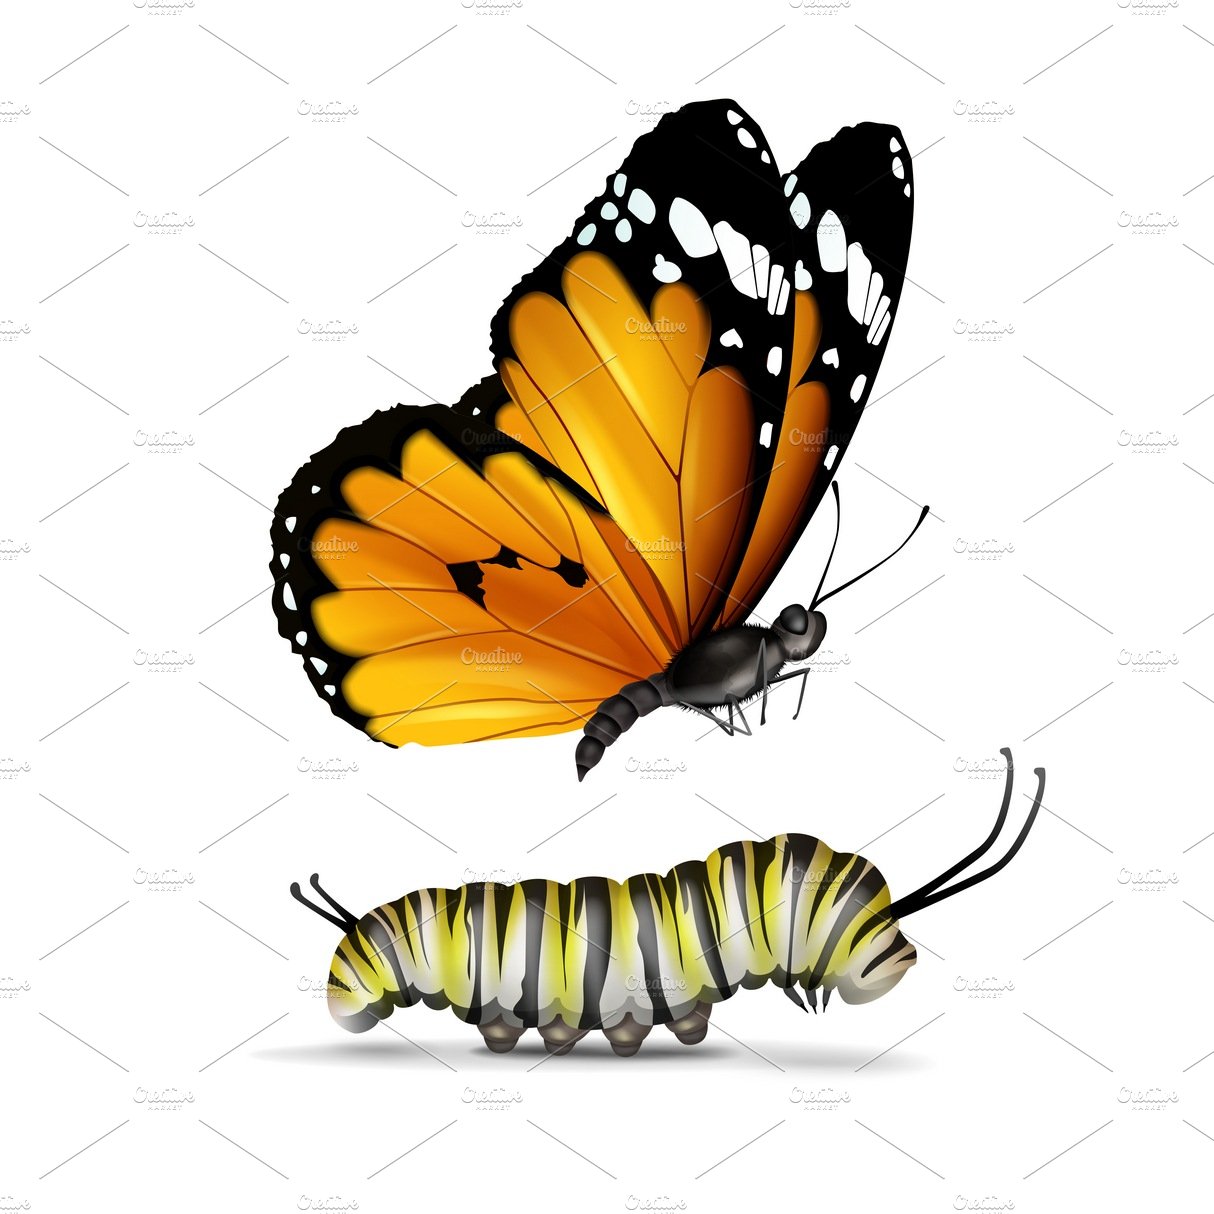 Monarch butterfly and caterpillar cover image.